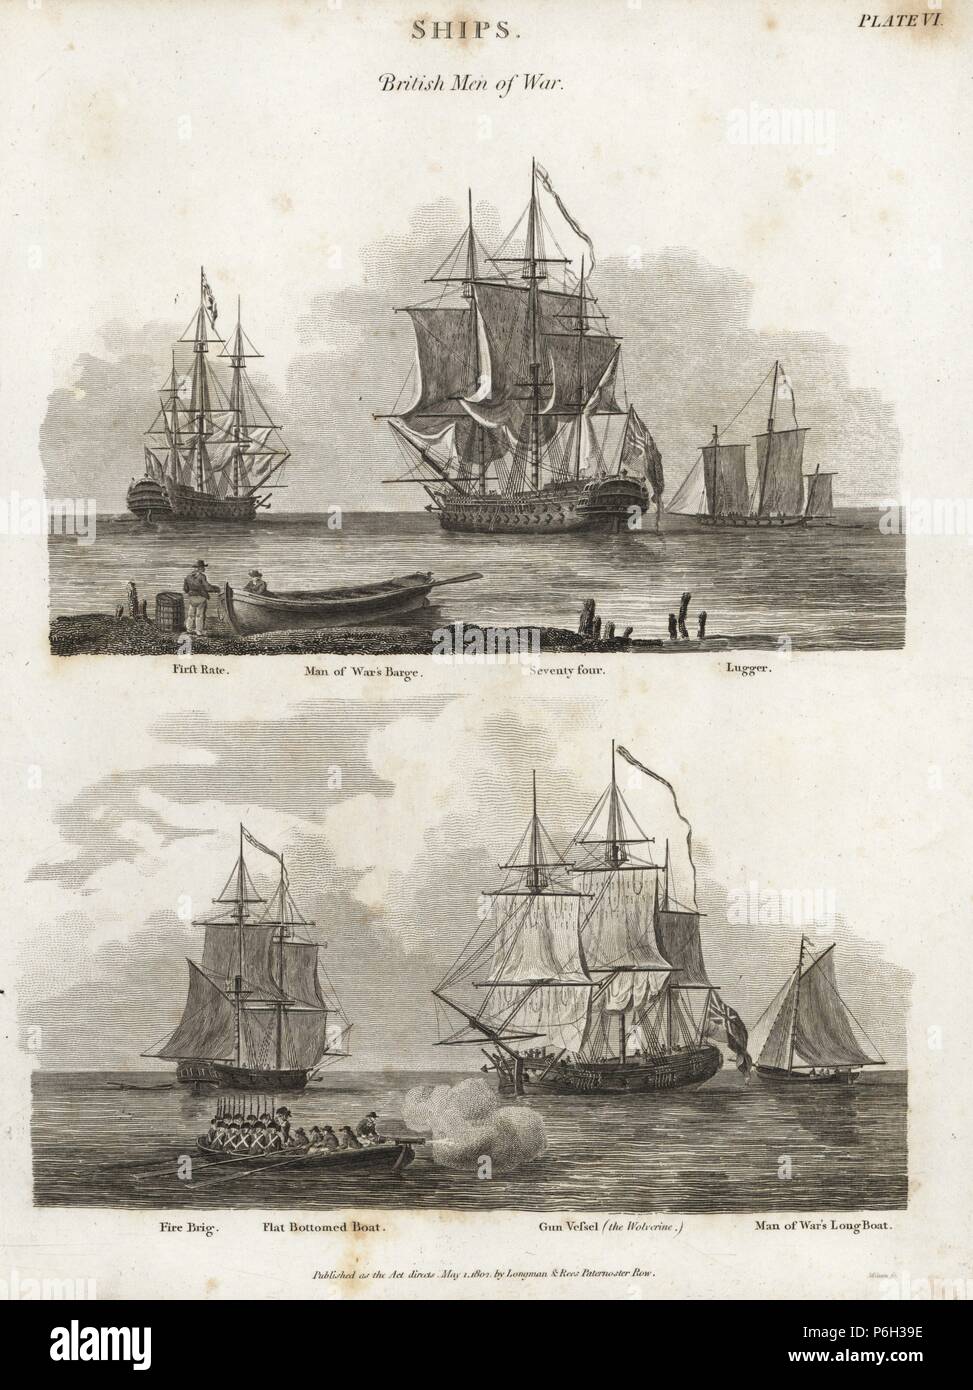 British Men of War, 18th century: first rate, man of war's barge, seventy four (74 guns) and lugger (top), fire brig, flat-bottomed boat, gun vessel (The Wolverine) and man of war's long boat (below). Copperplate engraving by Wilson Lowry after an illustration by J. Farey from Abraham Rees' 'Cyclopedia or Universal Dictionary,' London, 1802. Stock Photo